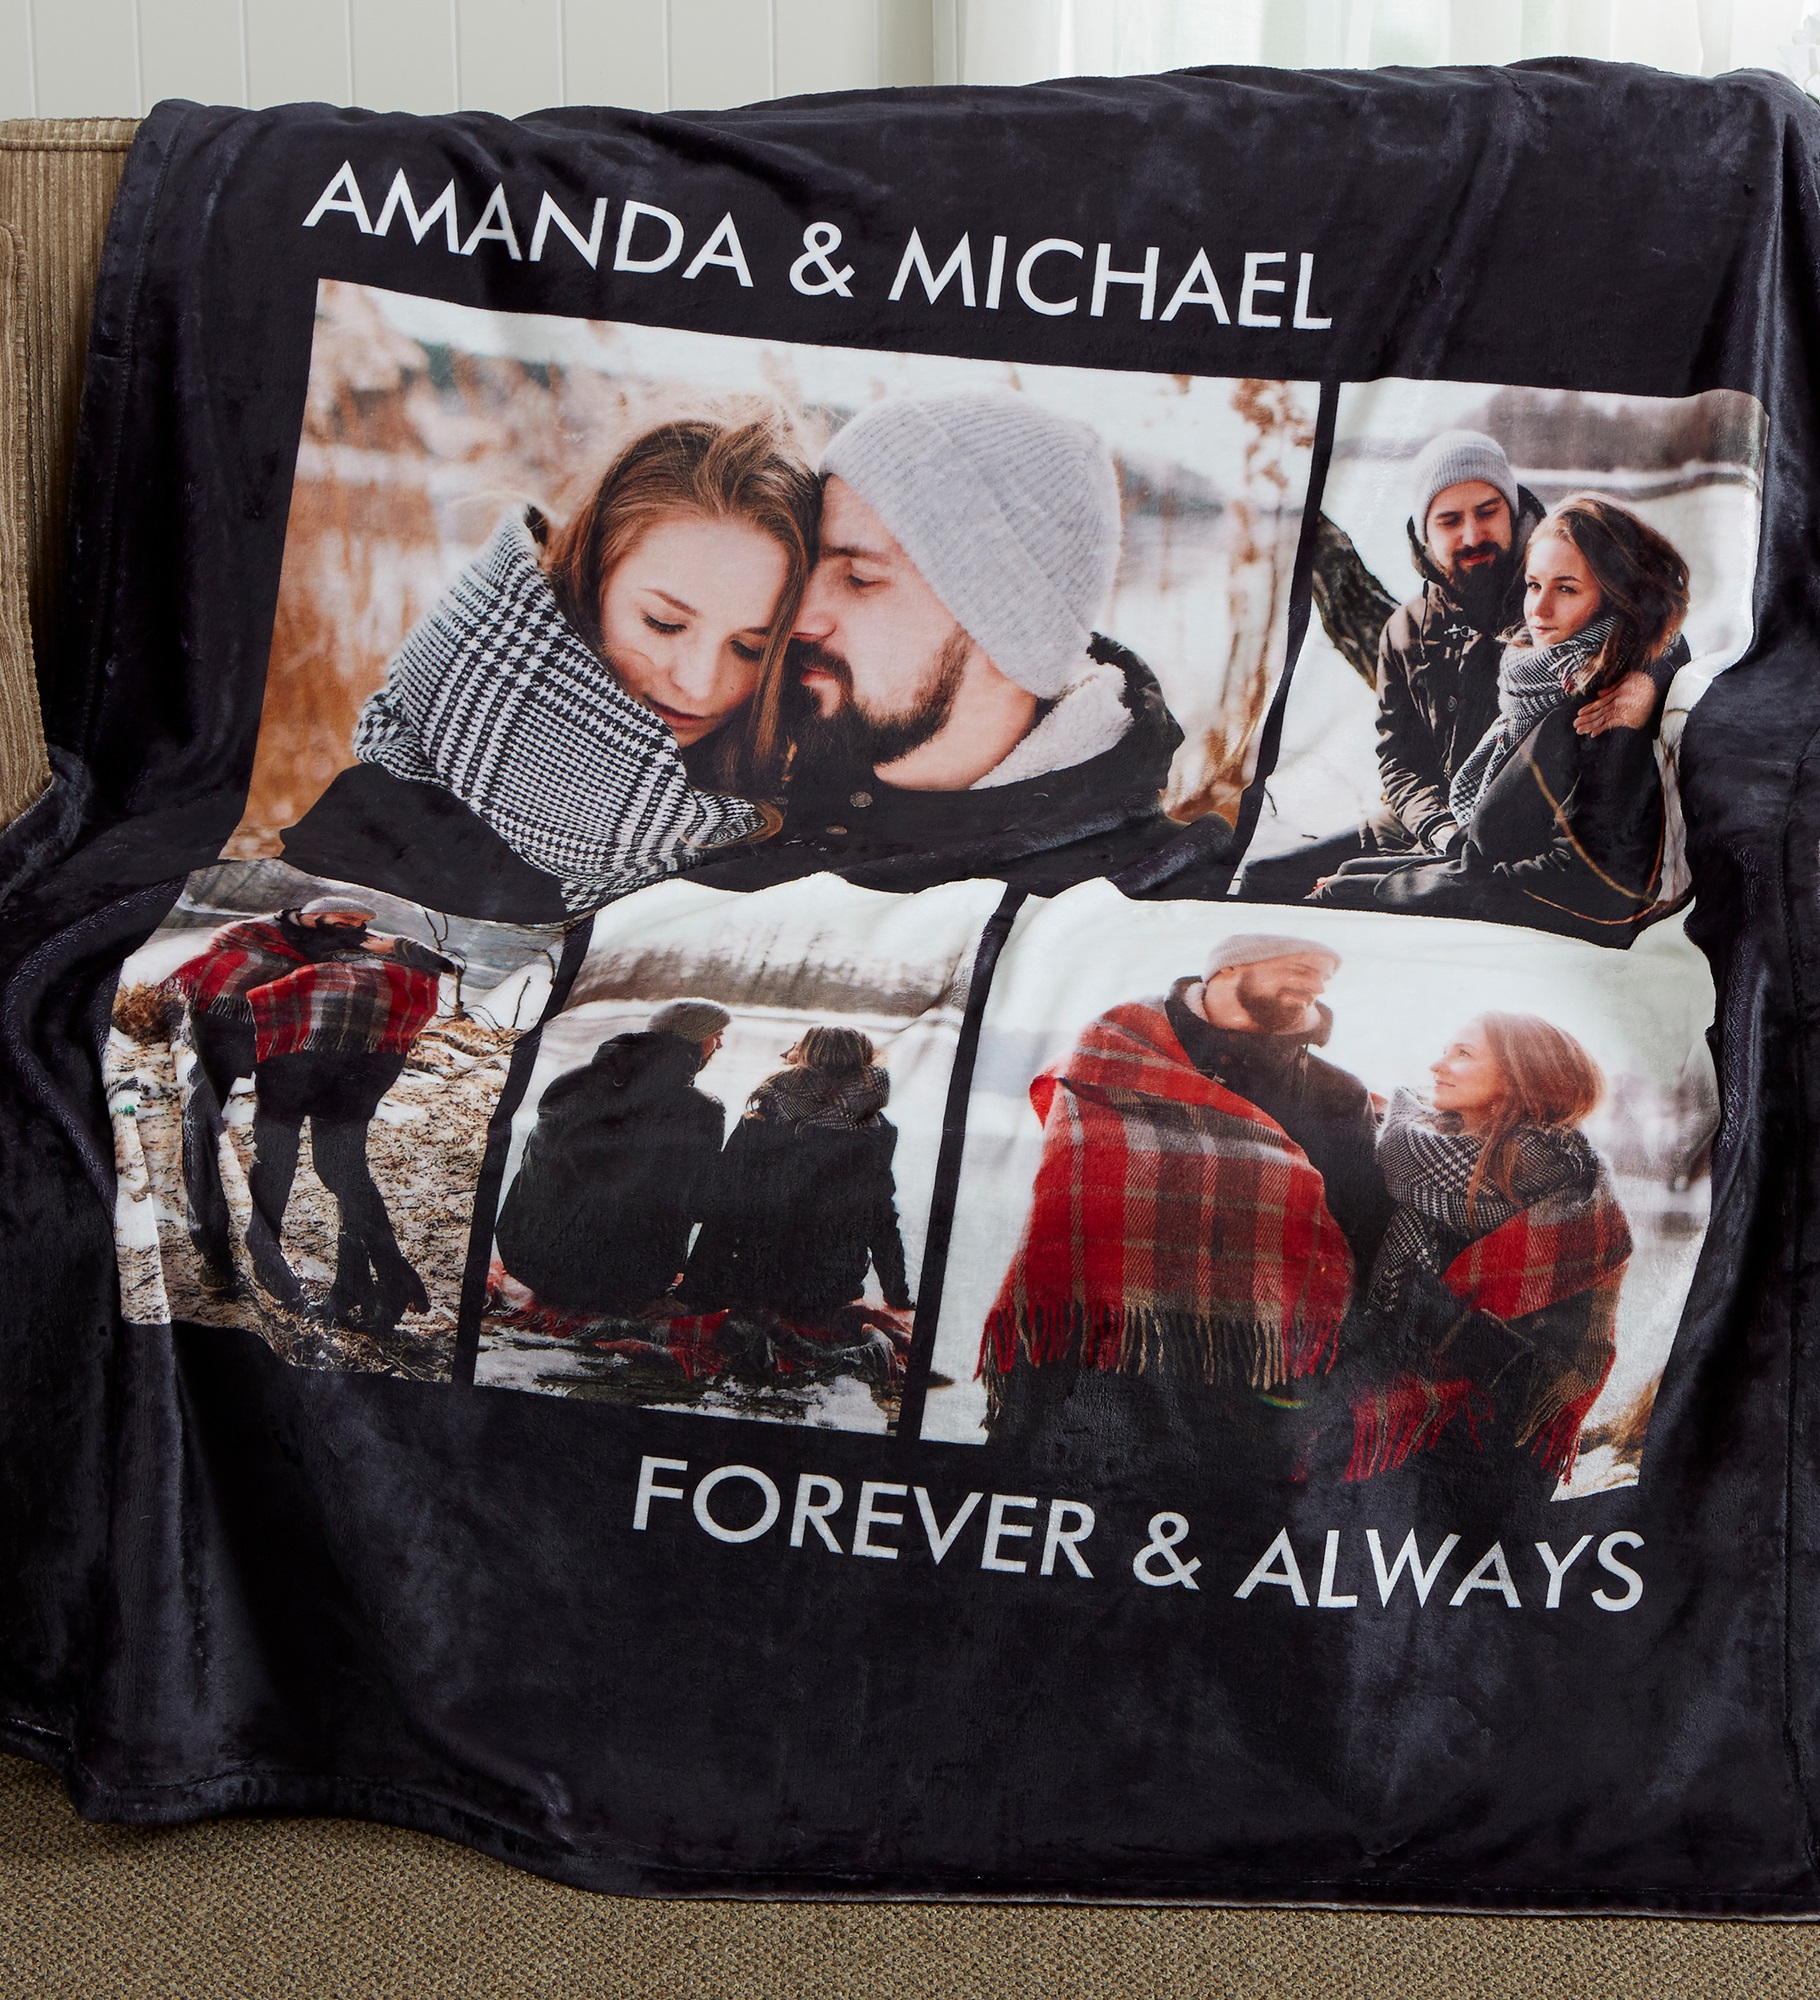 Picture Perfect Personalized Fleece Photo Blankets